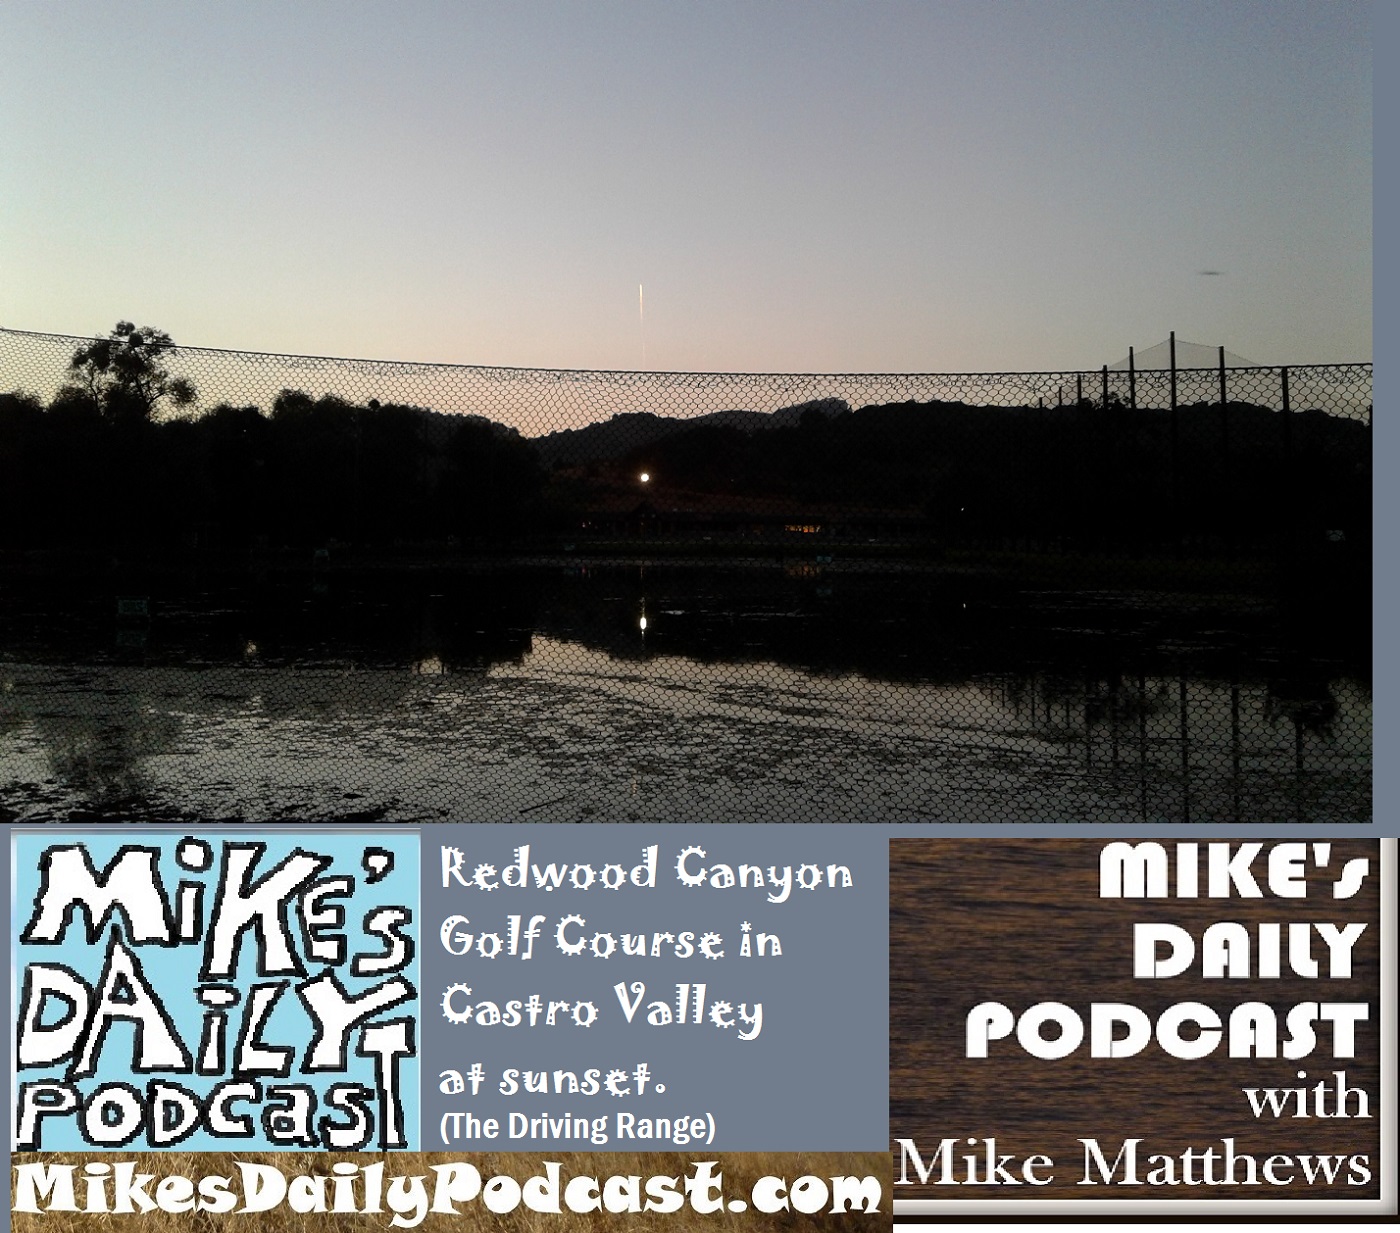 mikes-daily-podcast-1178-redwood-canyon-golf-course-castro-valley